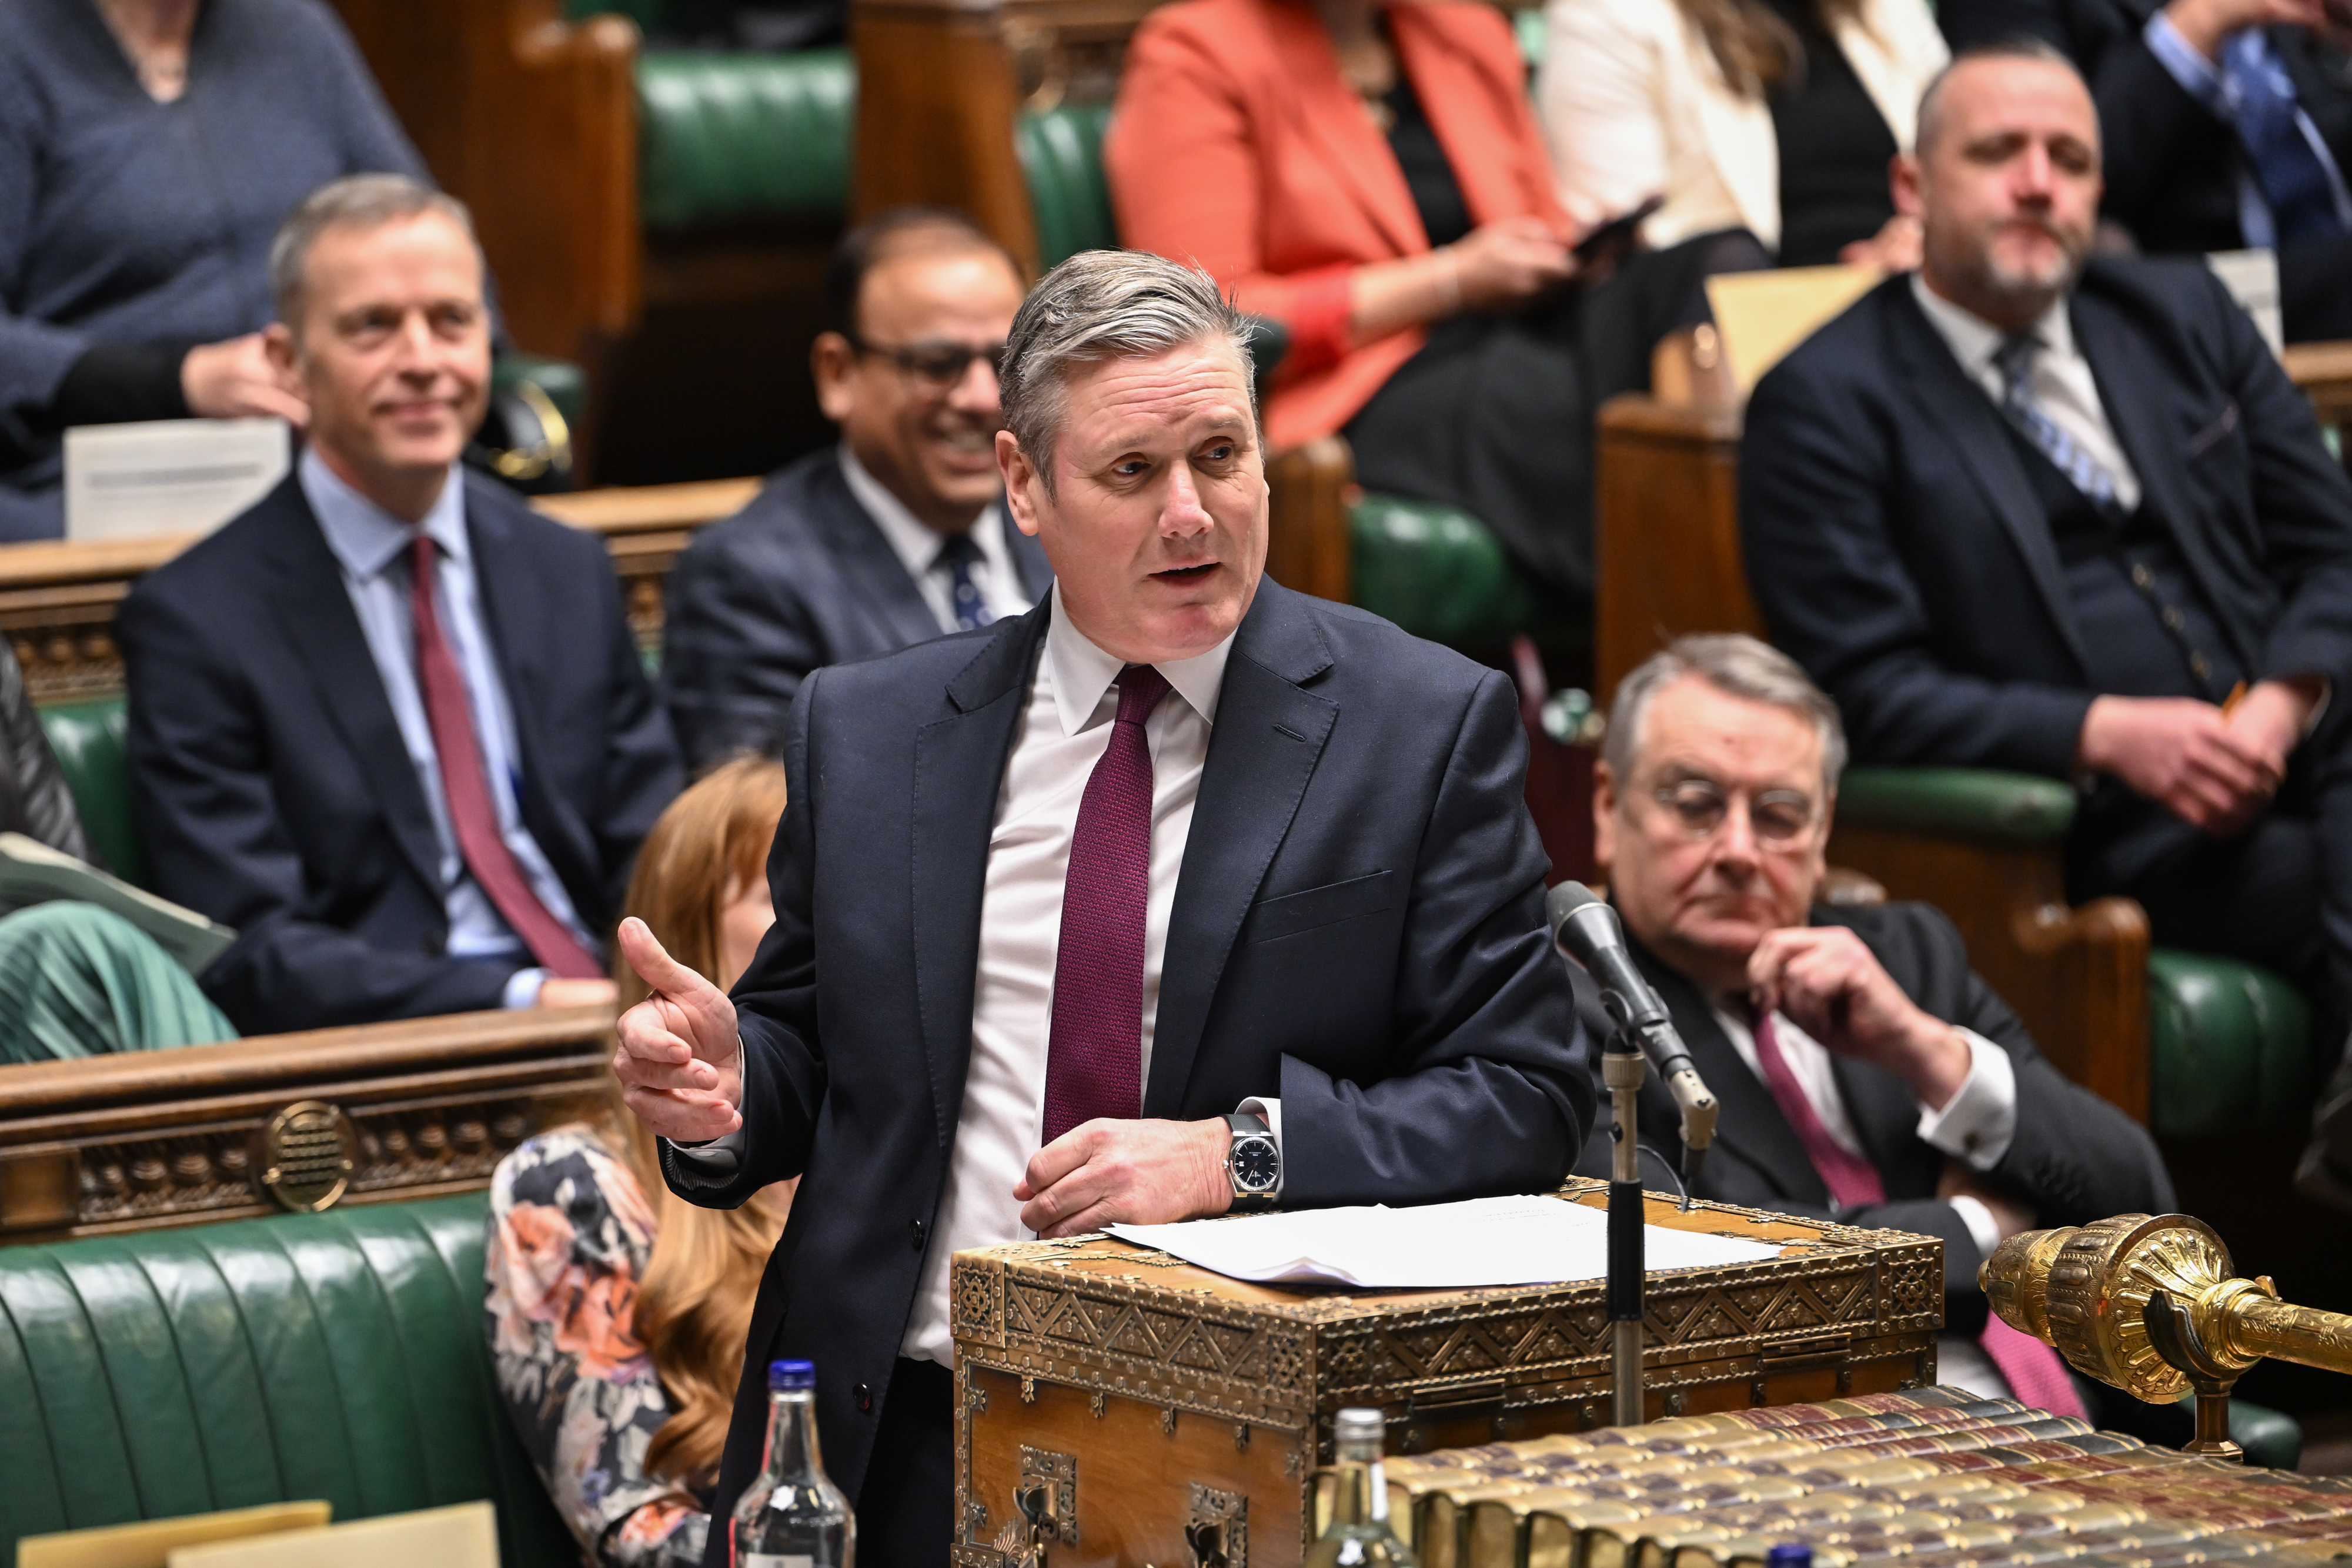 Keir Starmer criticised the Prime Minister for his comments.